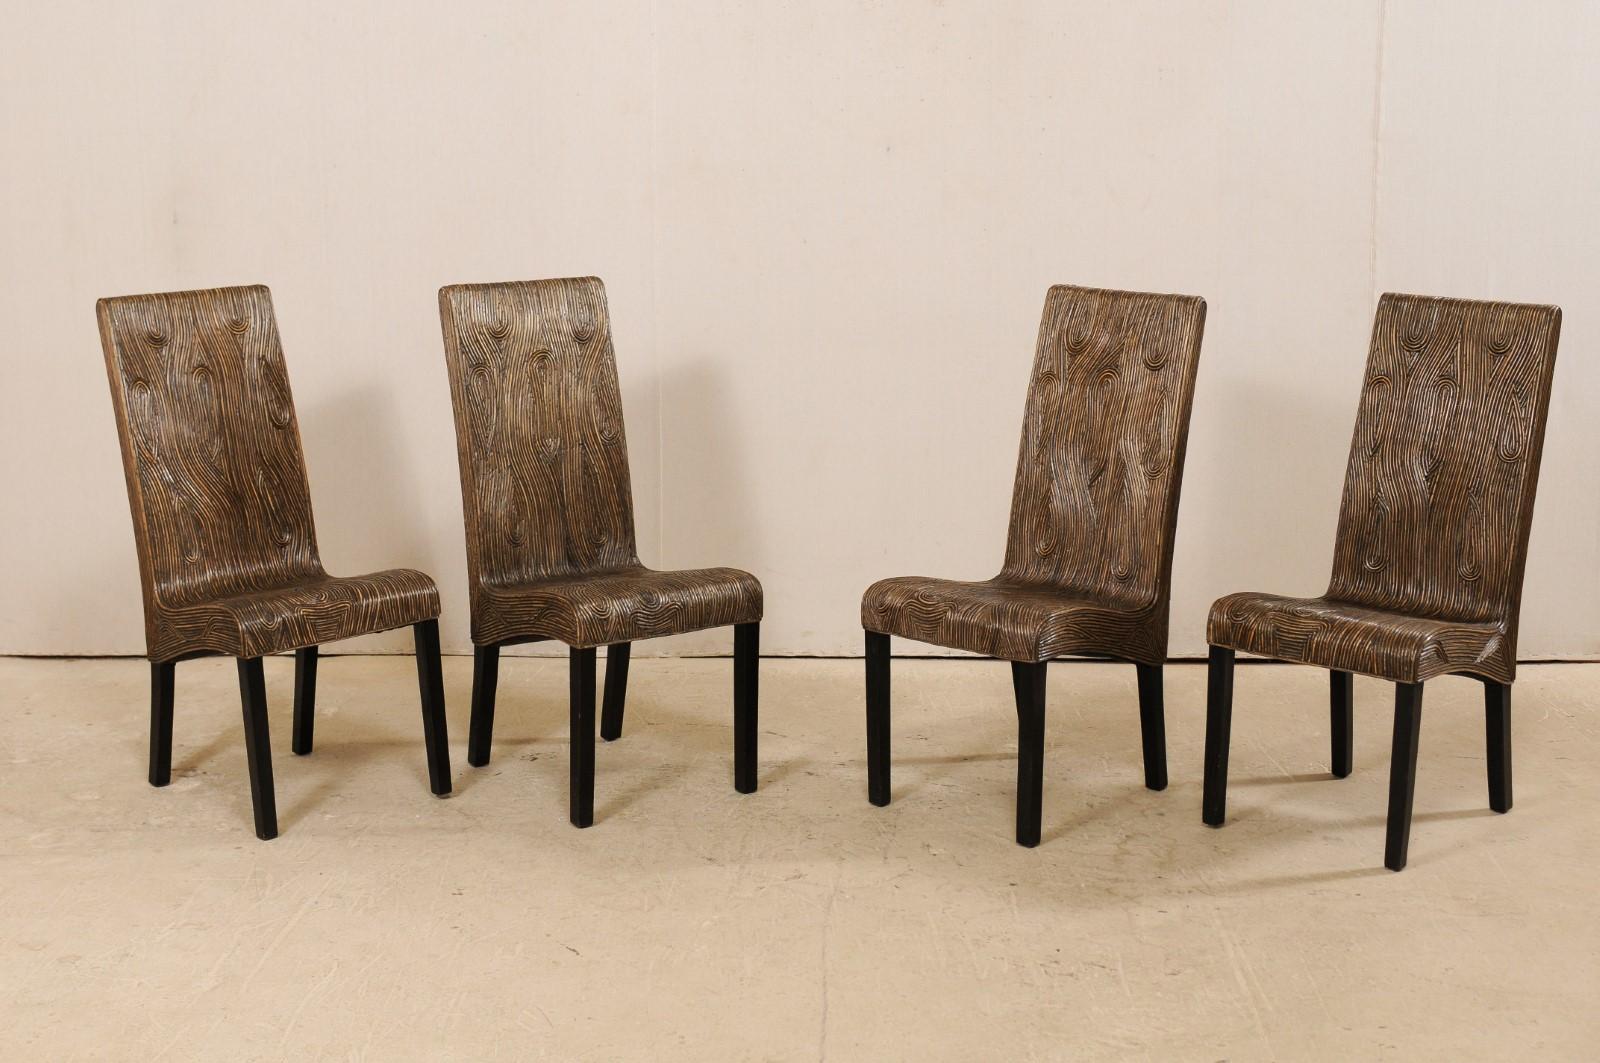 A vintage Italian set of four chairs, artfully crafted with bent reed seat and backs. This set of side chairs from Italy are artisan made with great detail to the design placement of the reeds, inspired by wood grain, which make up the covering of